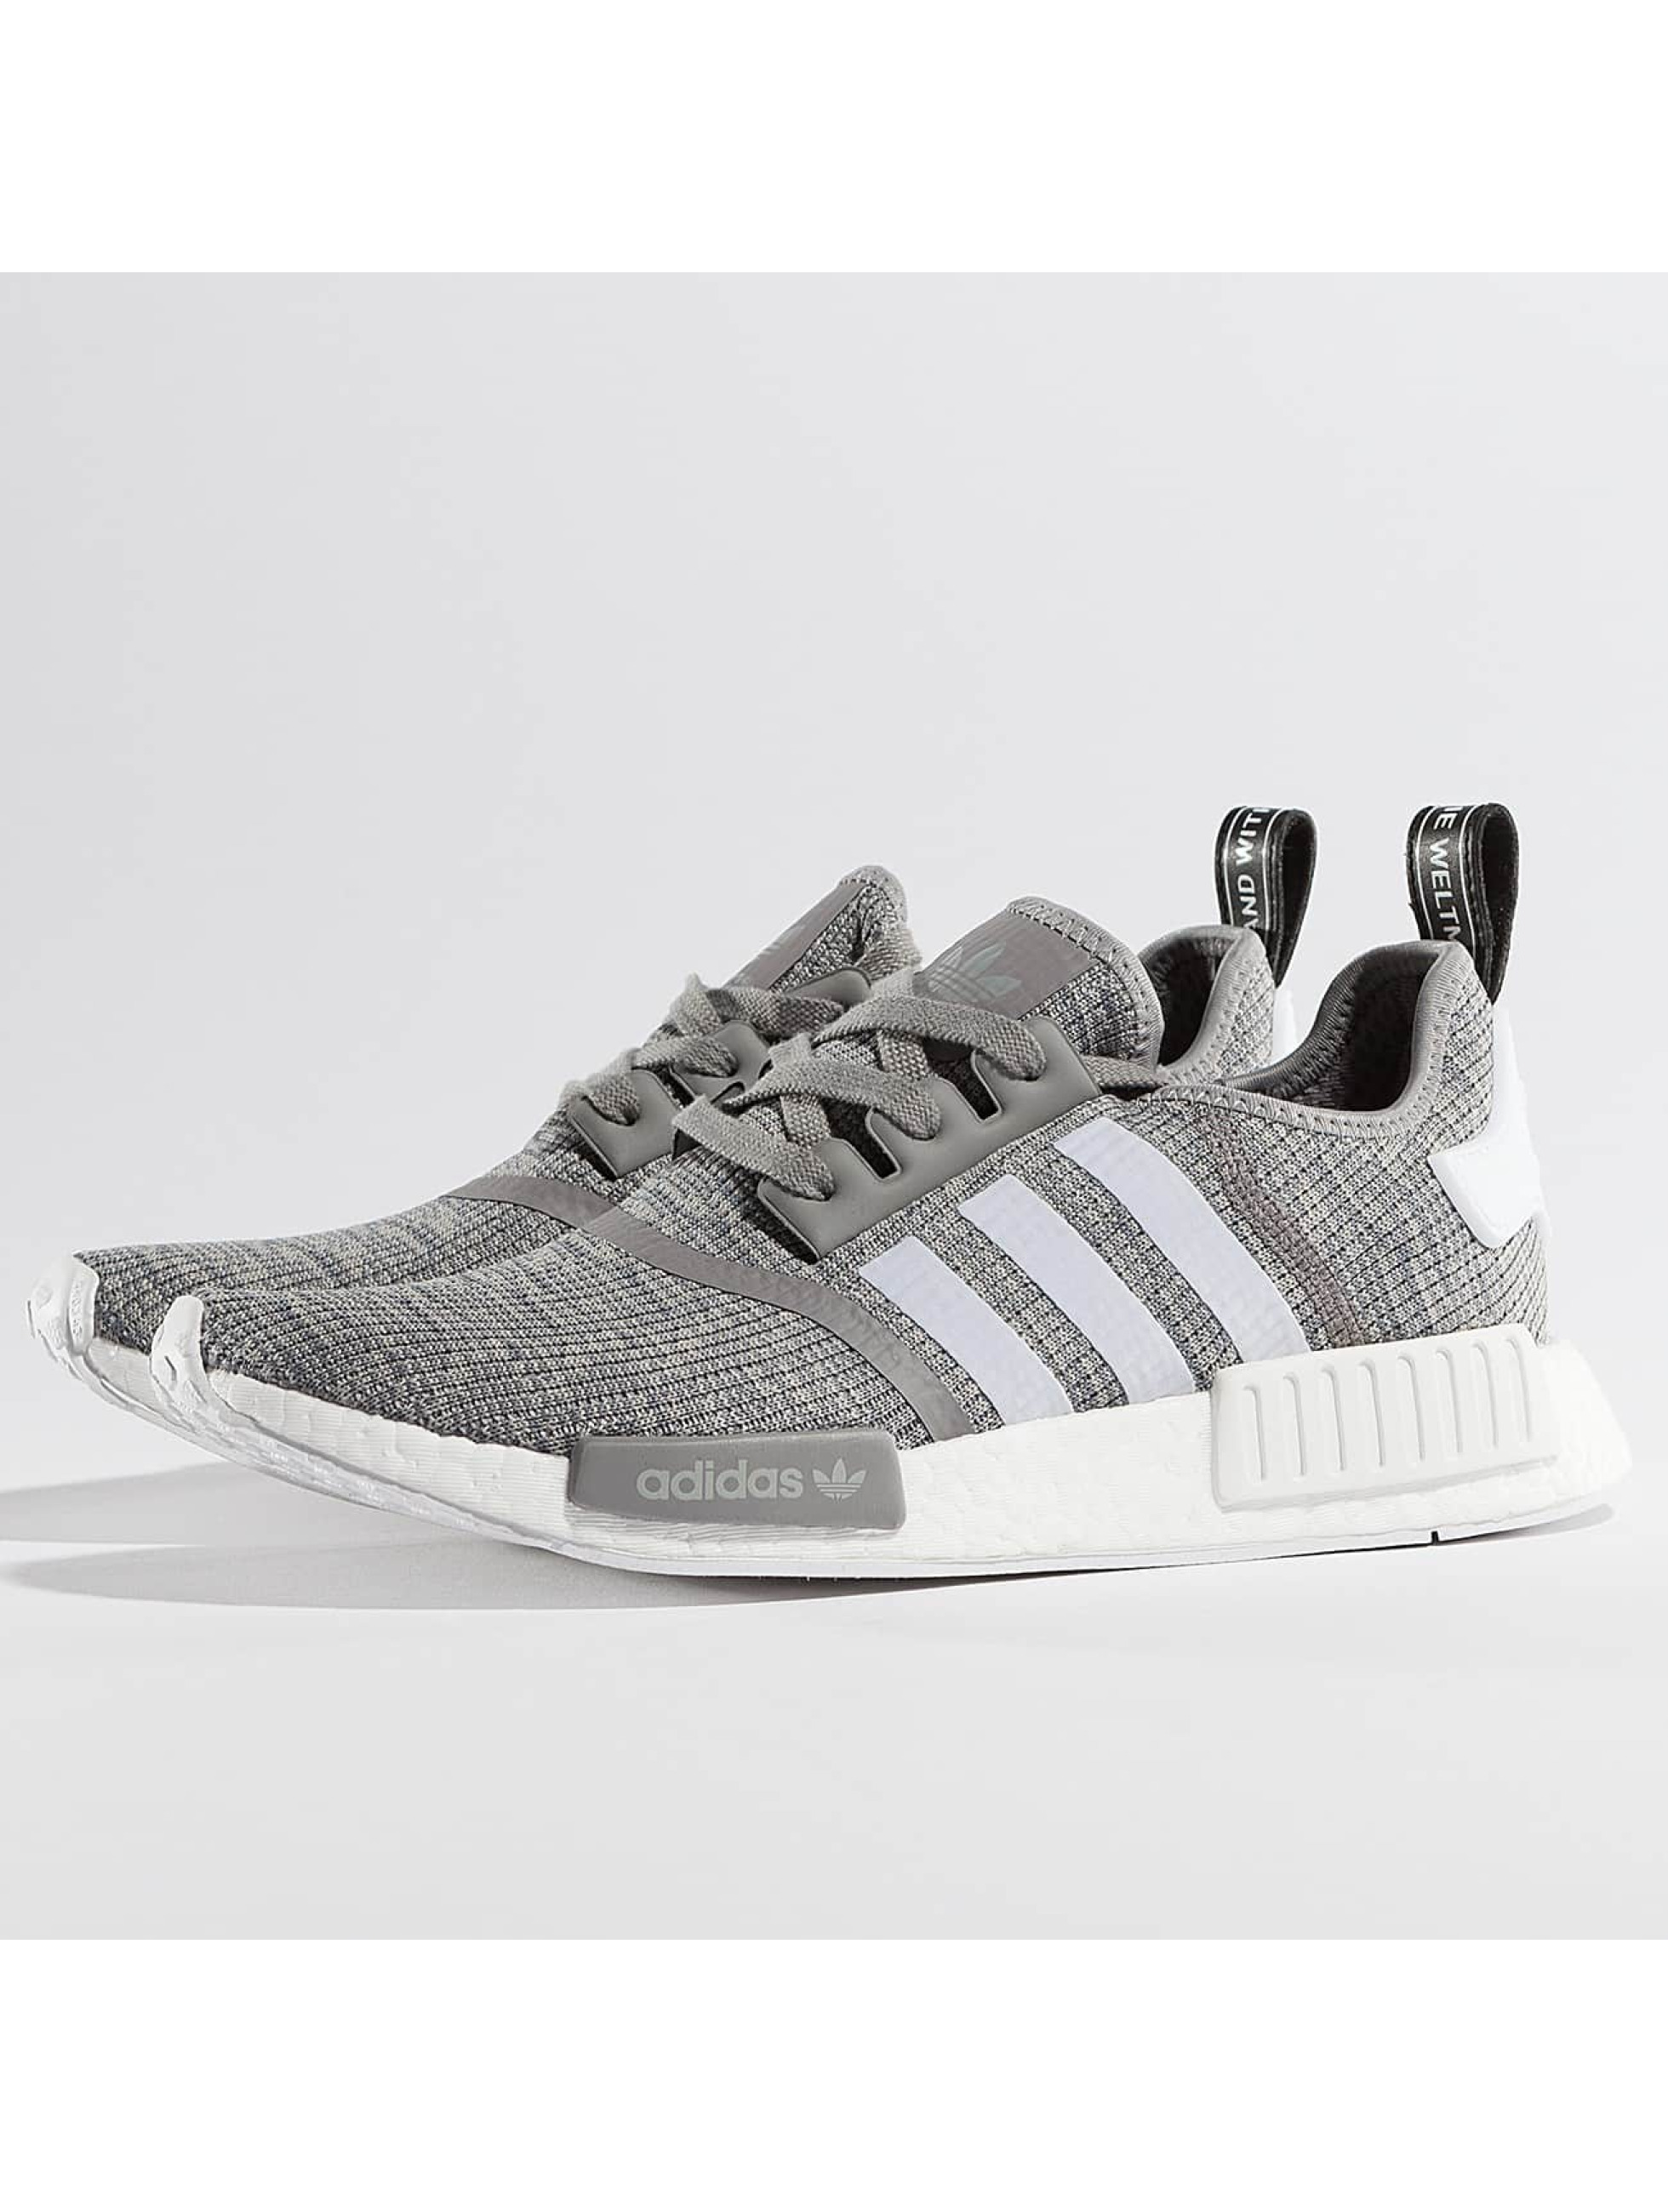 adidas Chaussures / Baskets NMD R1 en gris